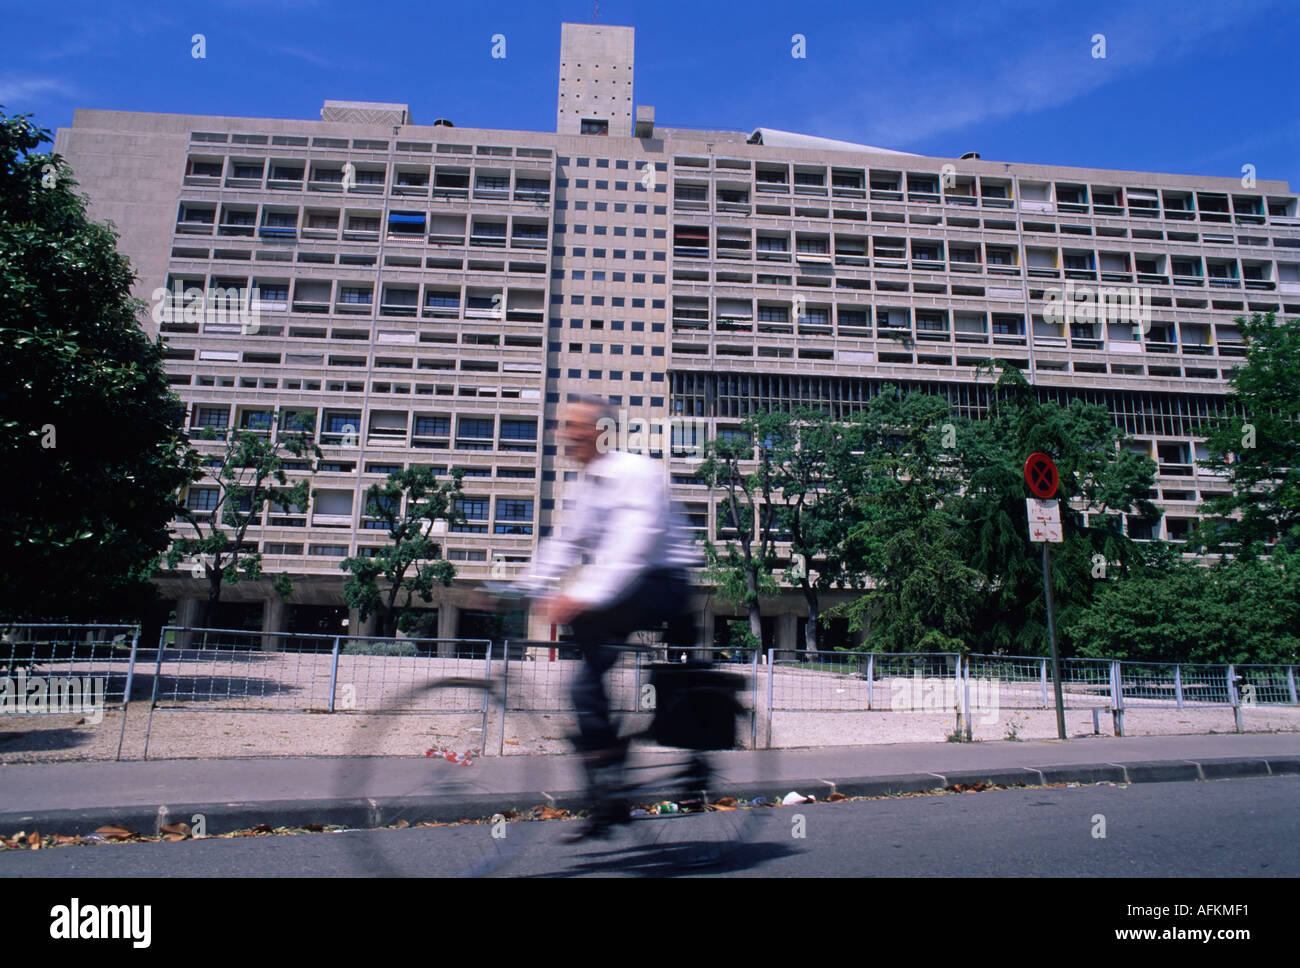 Cyclist passing the Cite Radieuse, a modernist residential housing complex designed by Le Corbusier, in Marseille, France. Stock Photo